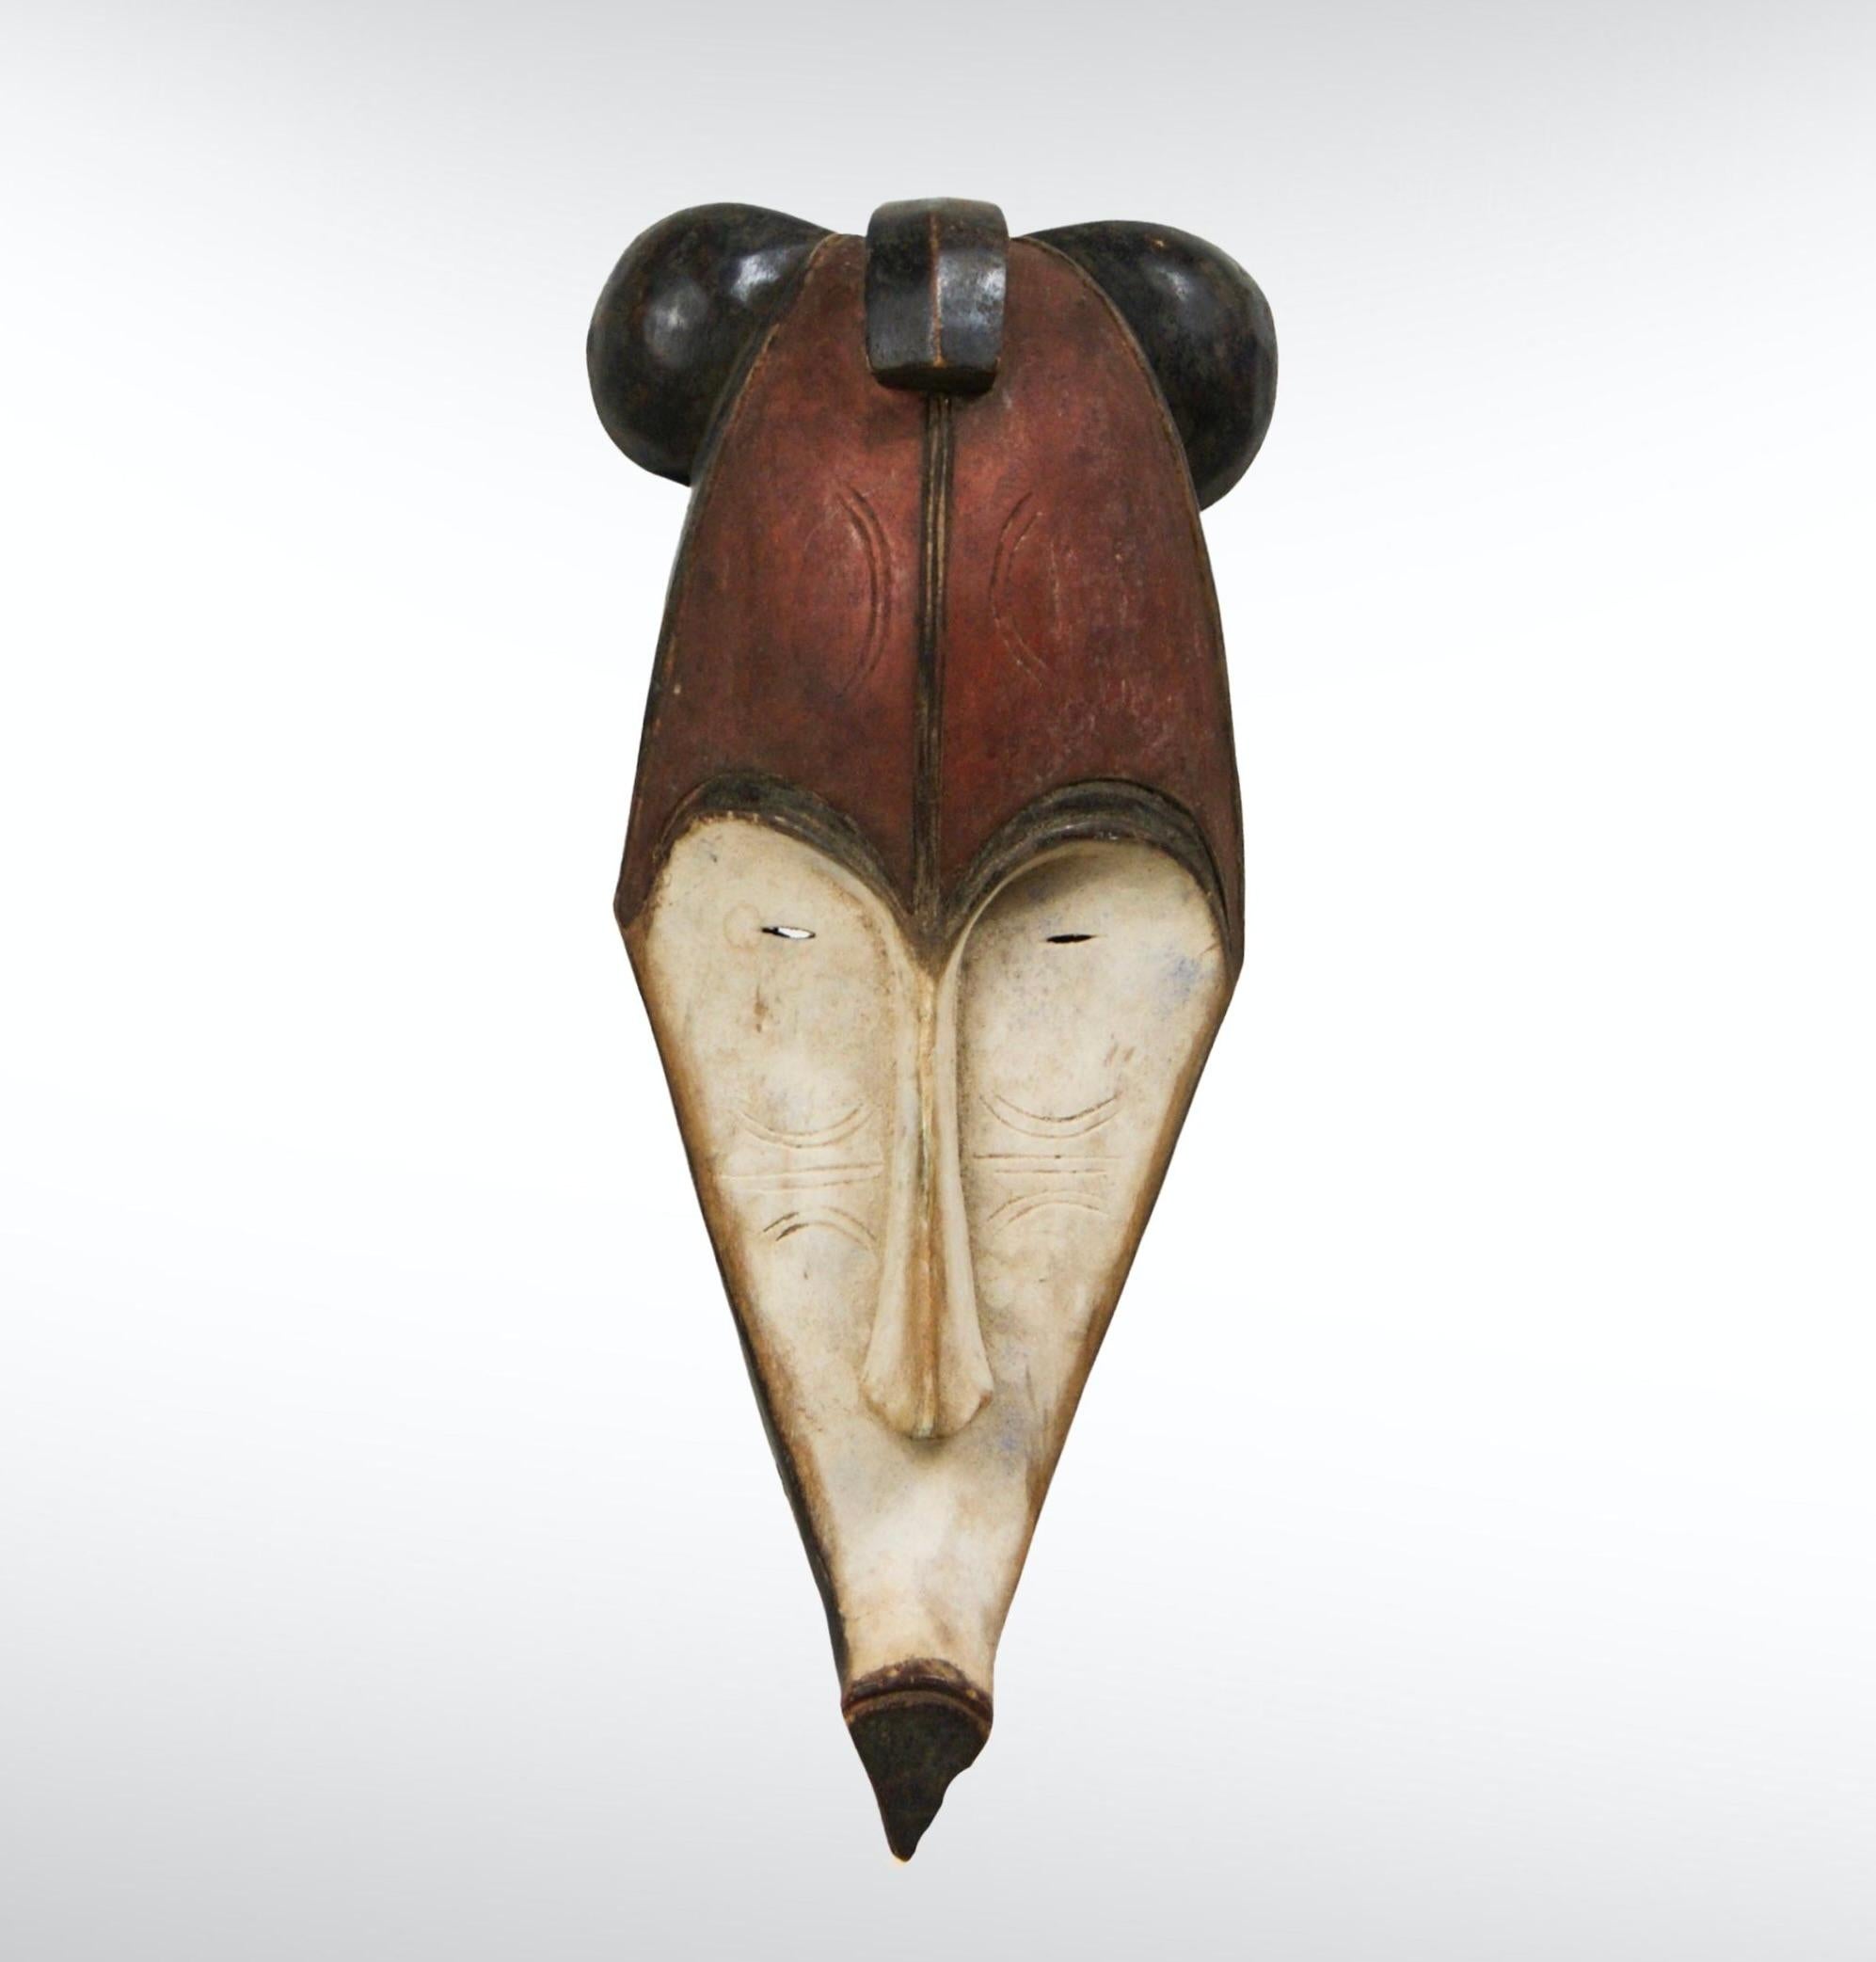 Large sized Fang Ngil mask from Gabon Africa circa 1910s.
The Ngil were a powerful 'Male Only' secret society originating within the Fang people of Gabon.
They were tasked with administering justice, policing the community and they also formed a